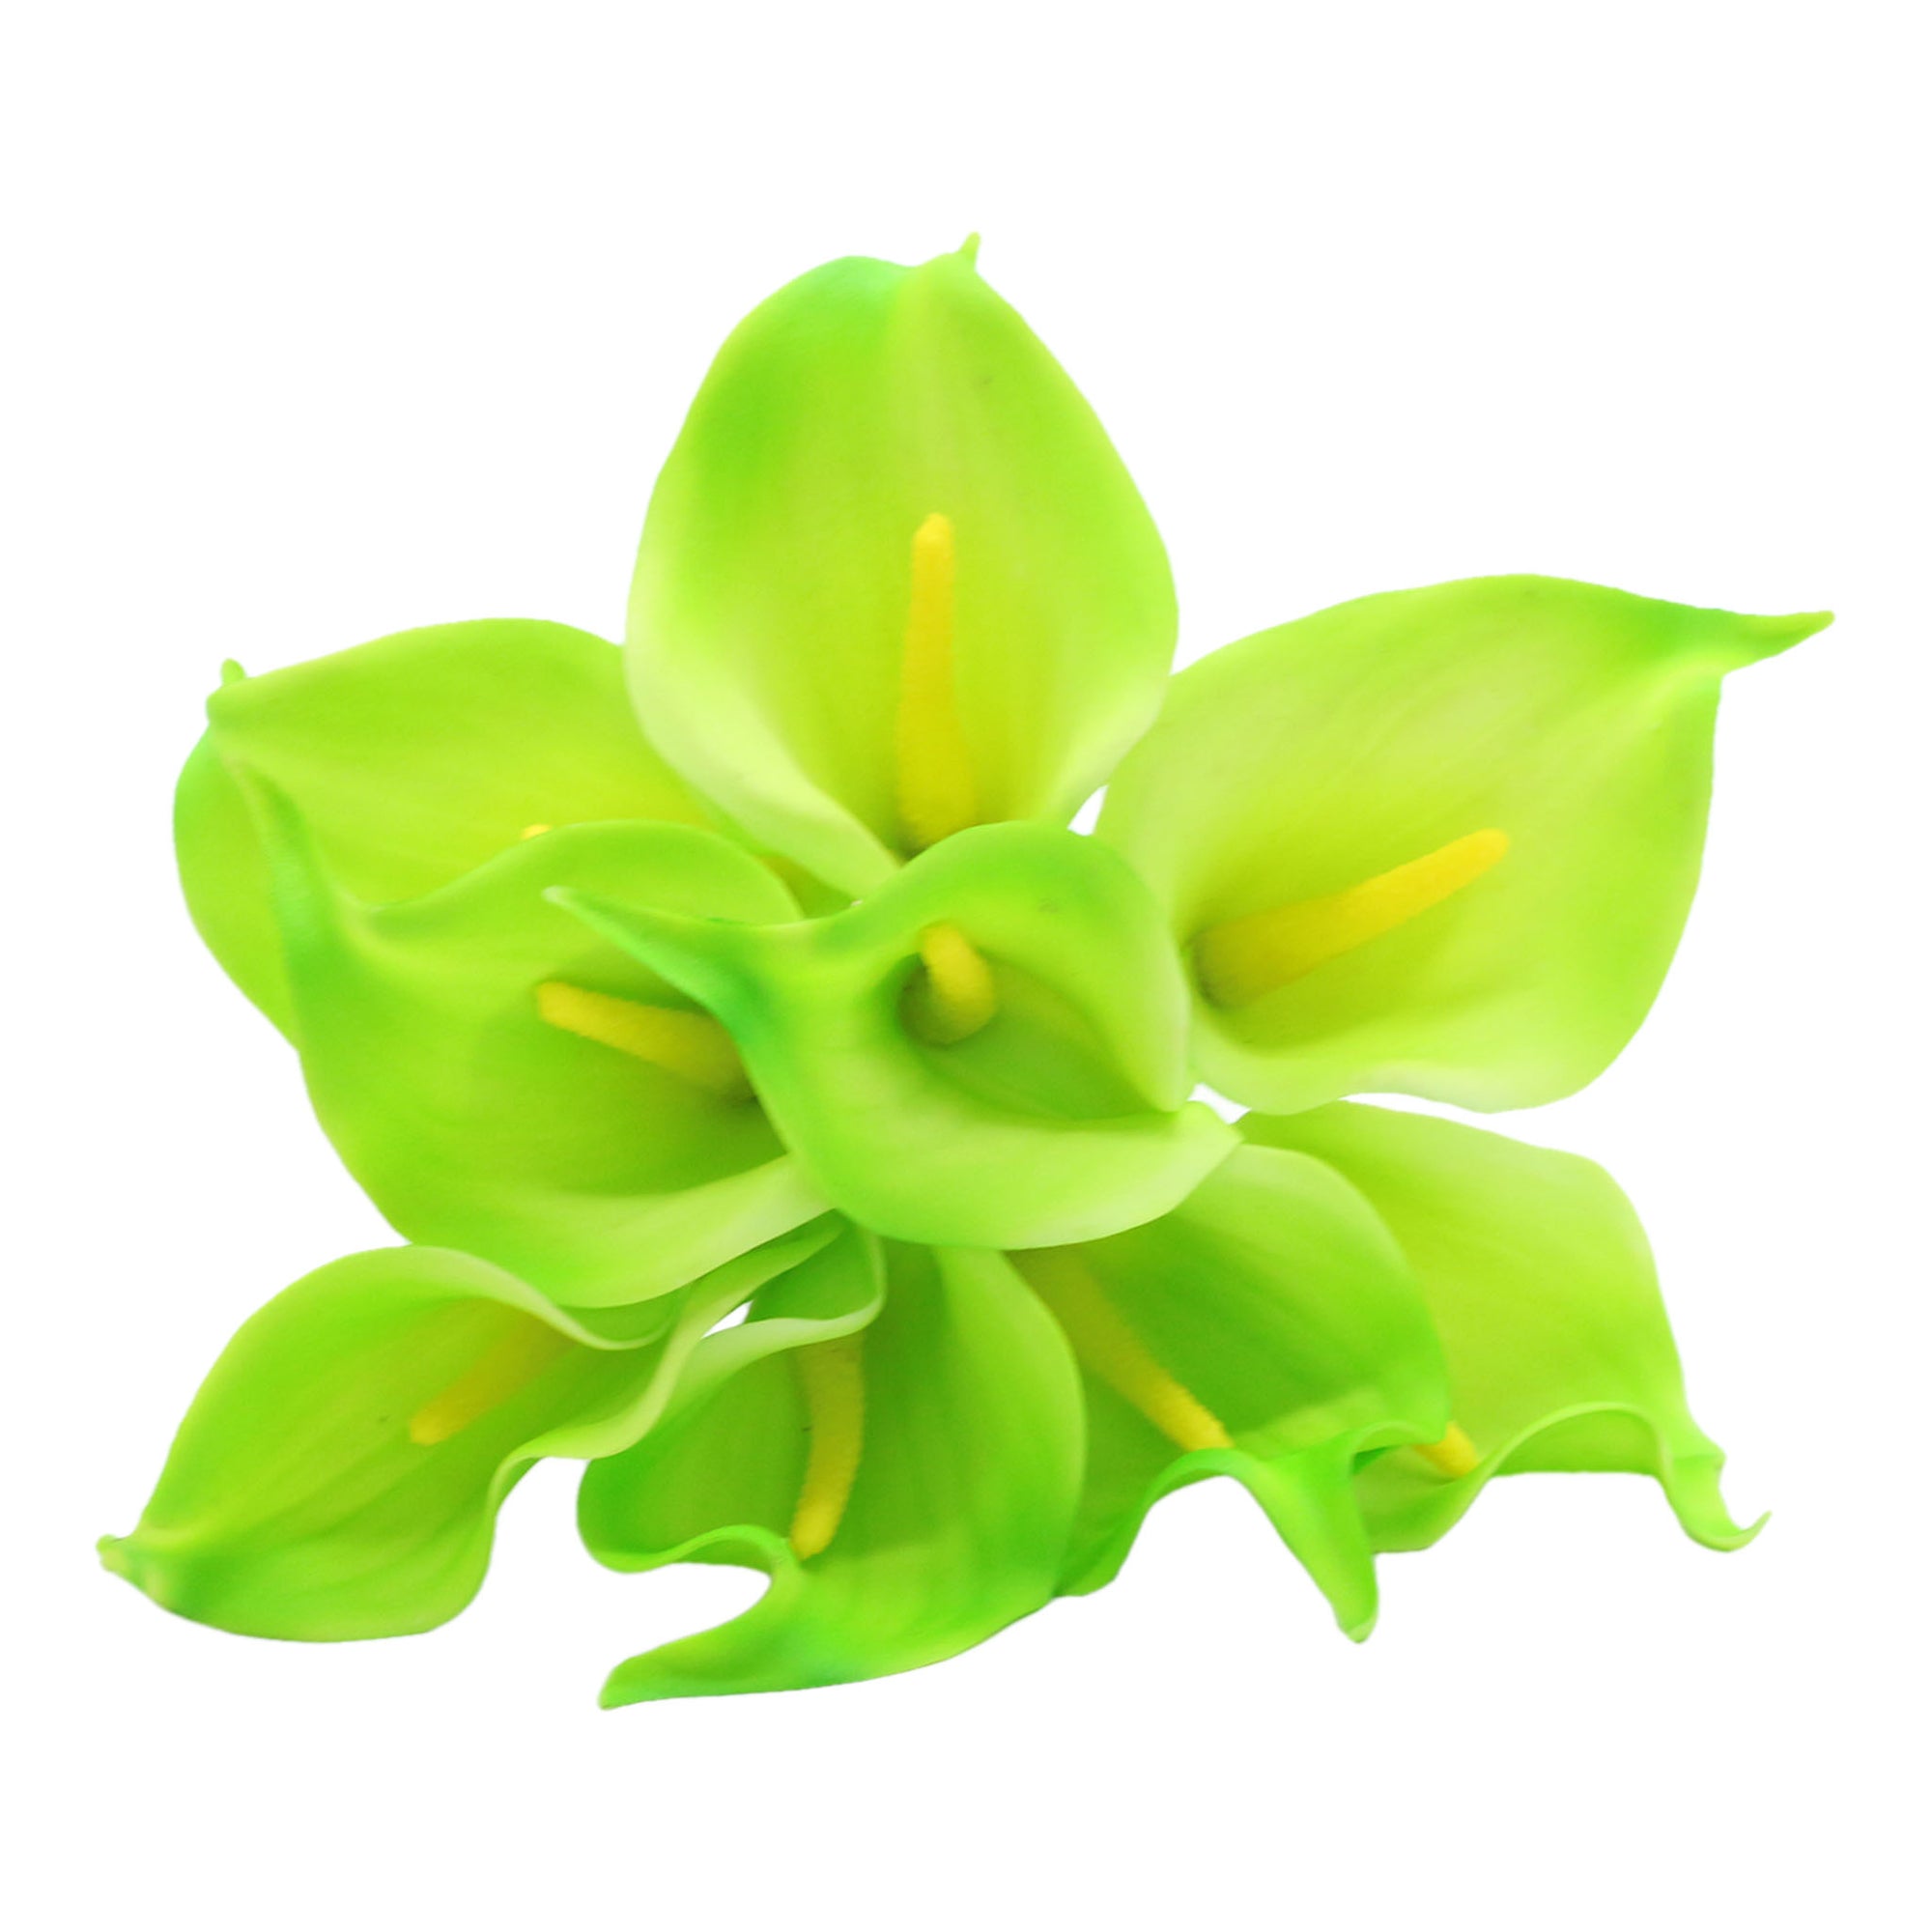 Lime Green Calla Lily Bouquet Real Touch Flowers for Corsages DIY